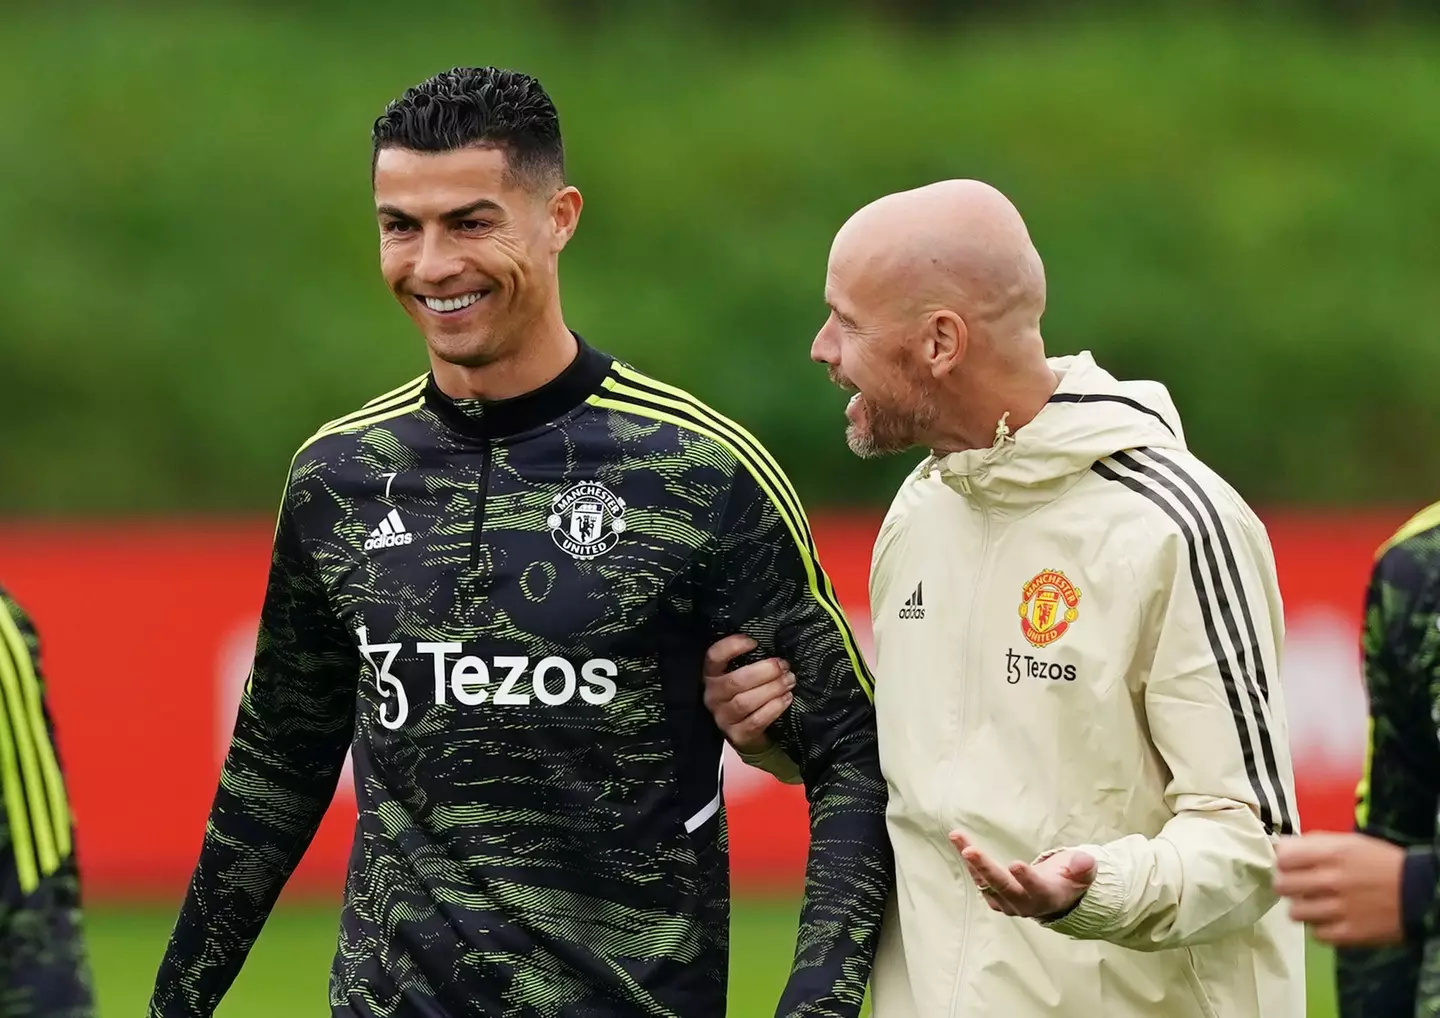 Ten Hag insists Ronaldo is happy at Old Trafford, despite his diminishing role. (Image